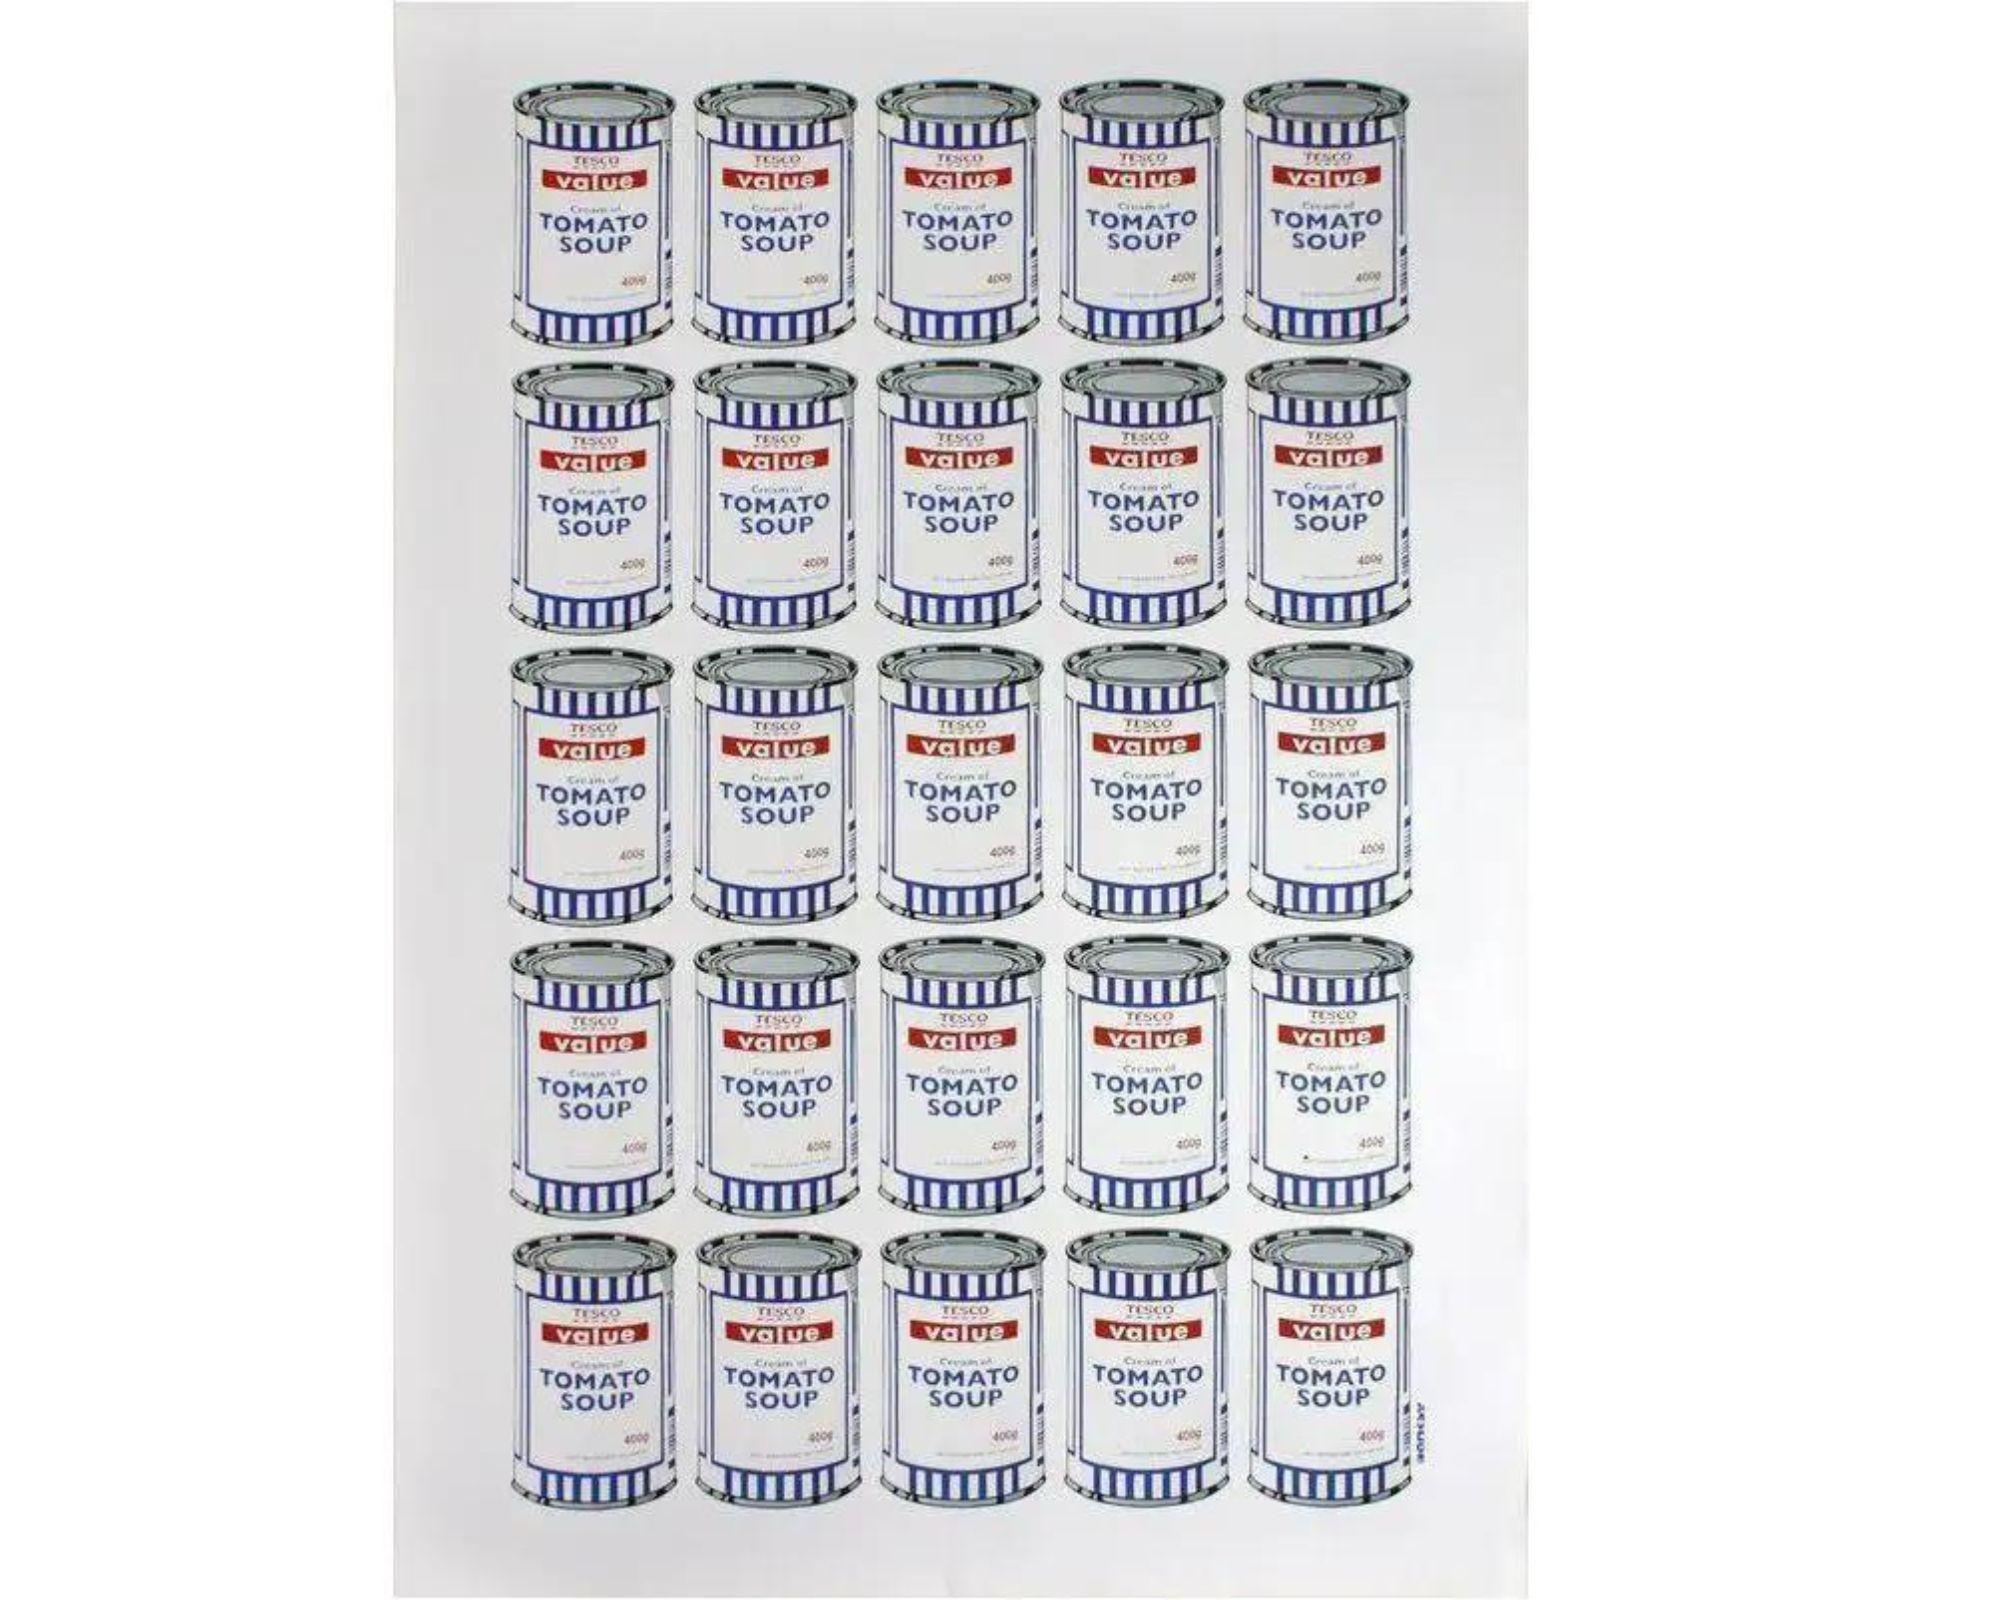 Soup Cans - Print by Banksy